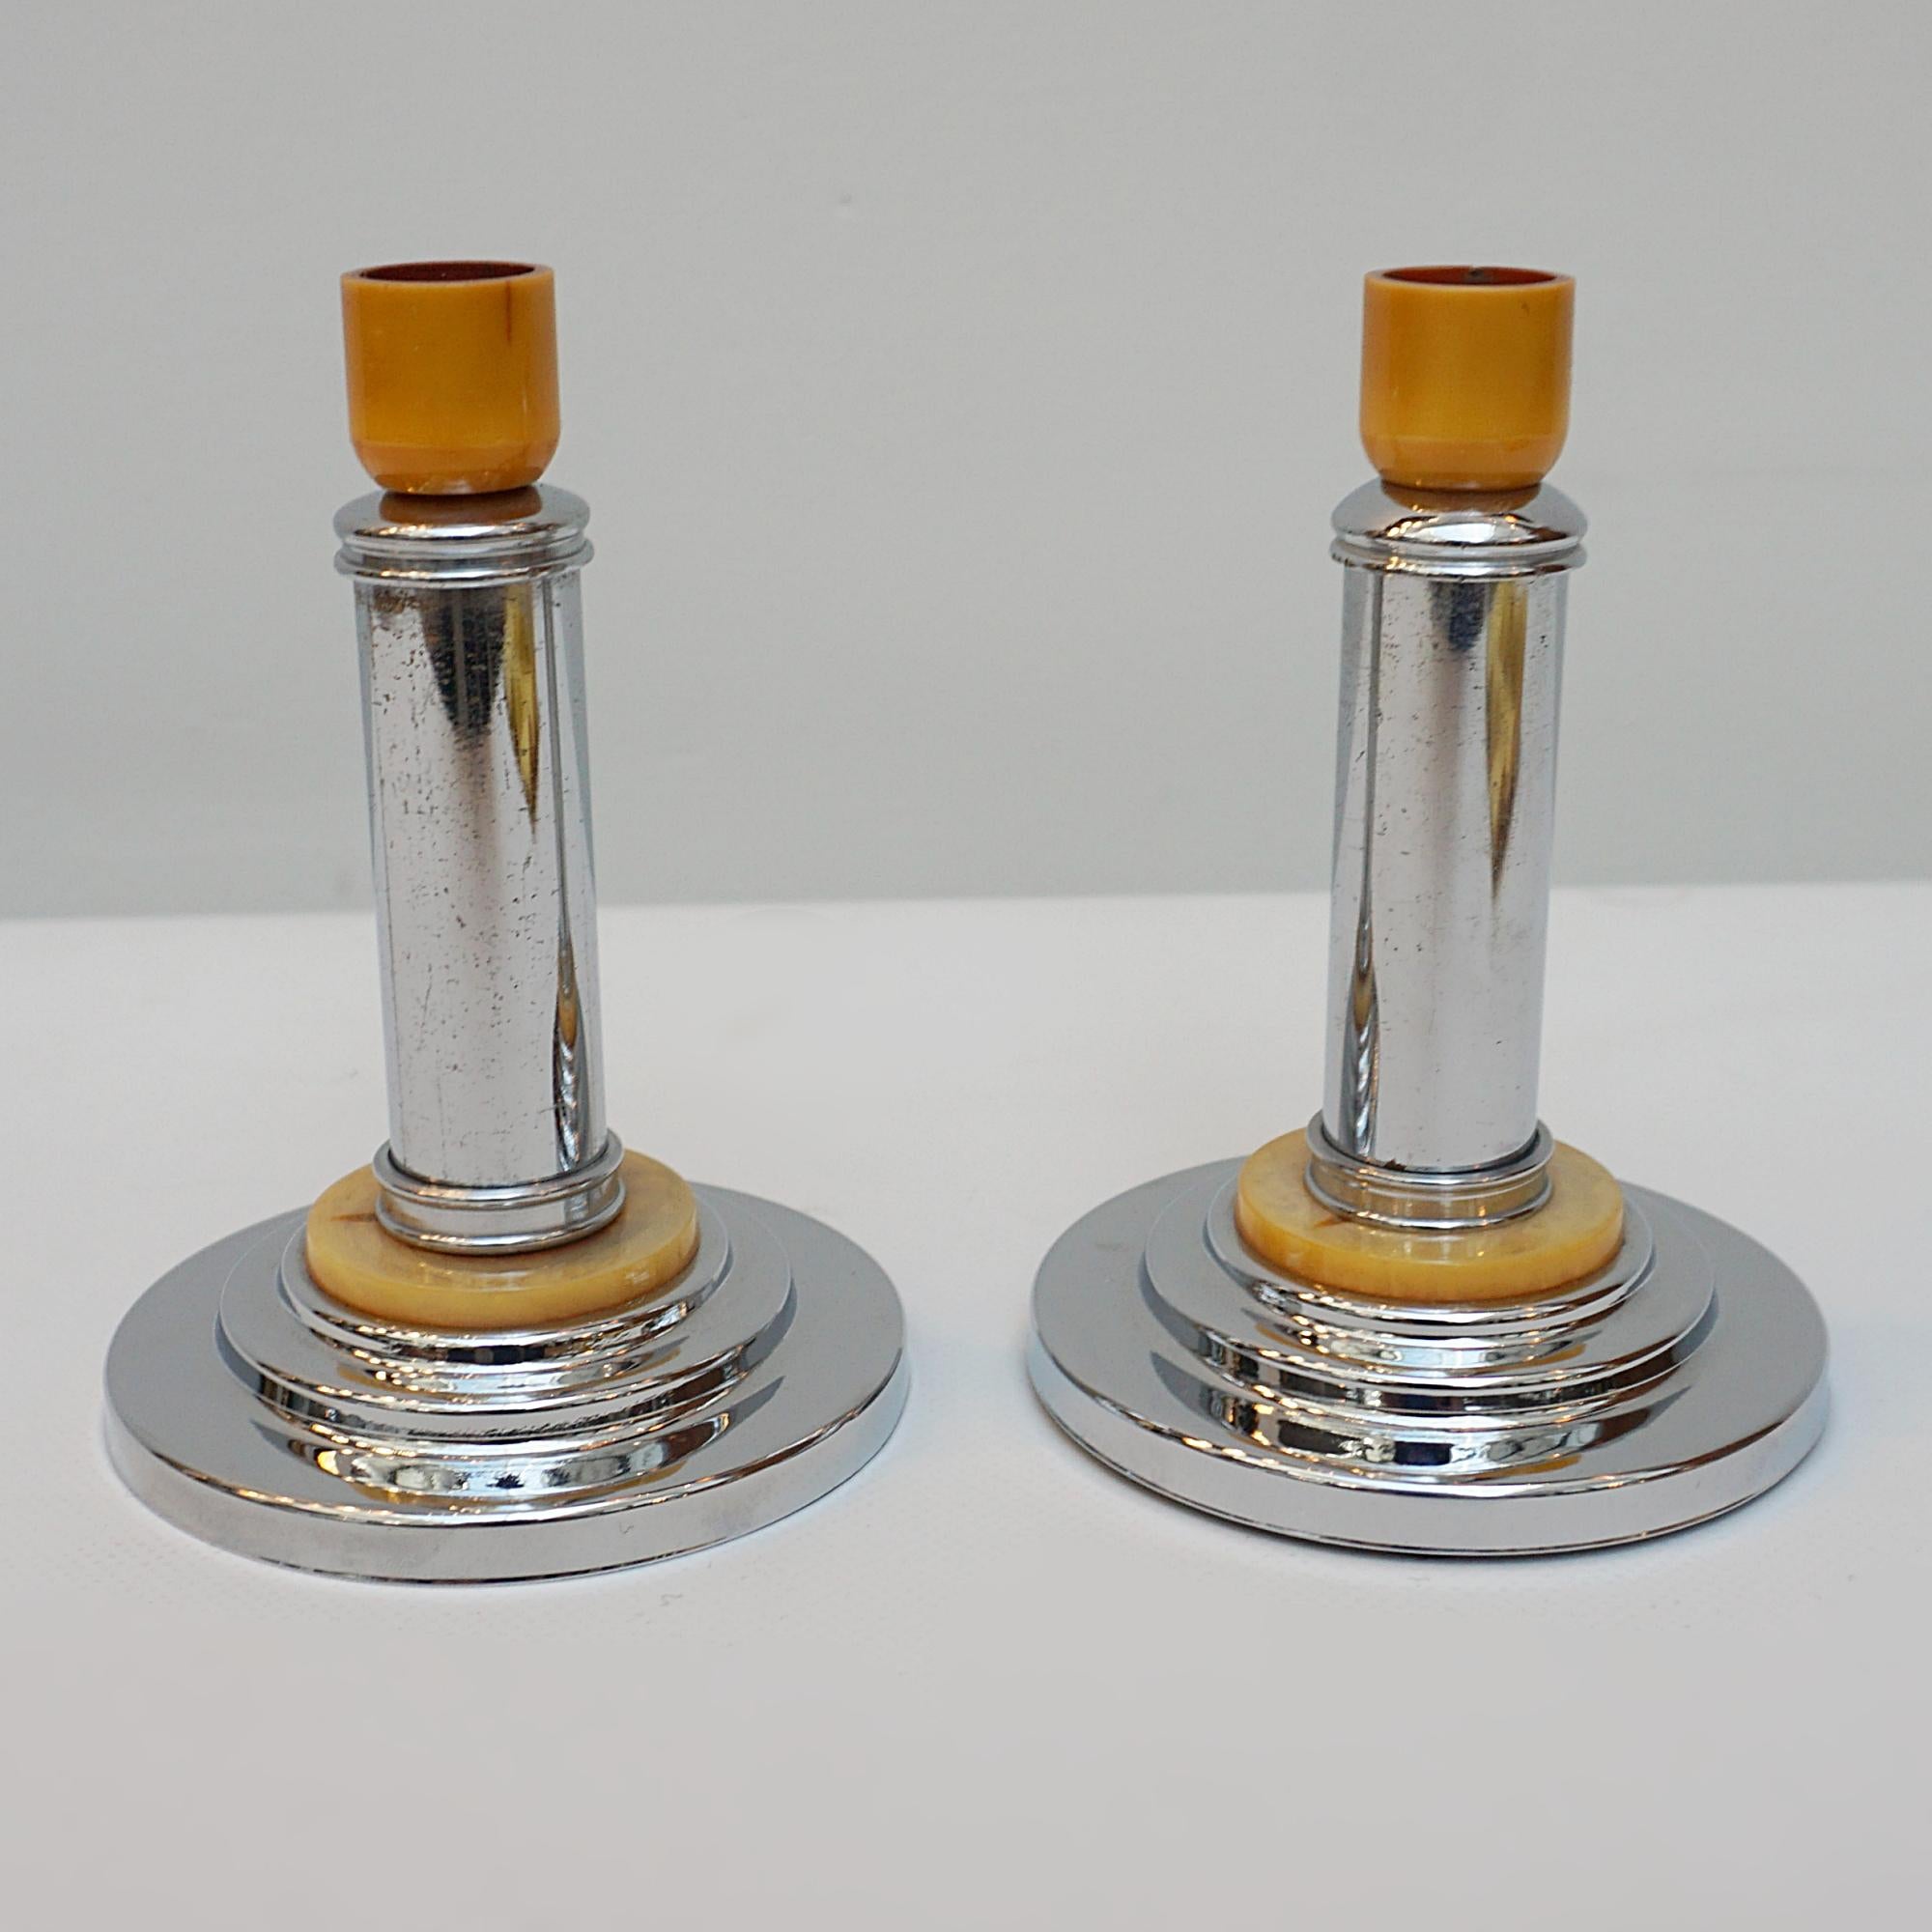 A pair of Art Deco style candlesticks. A chromed cylindrical stem. Set over a rounded, stepped chromed metal base with an amber bakelite ring with amber bakelite candle cup top,

Dimensions: H 13.5cm W 10cm

Origin: English

Item Number: